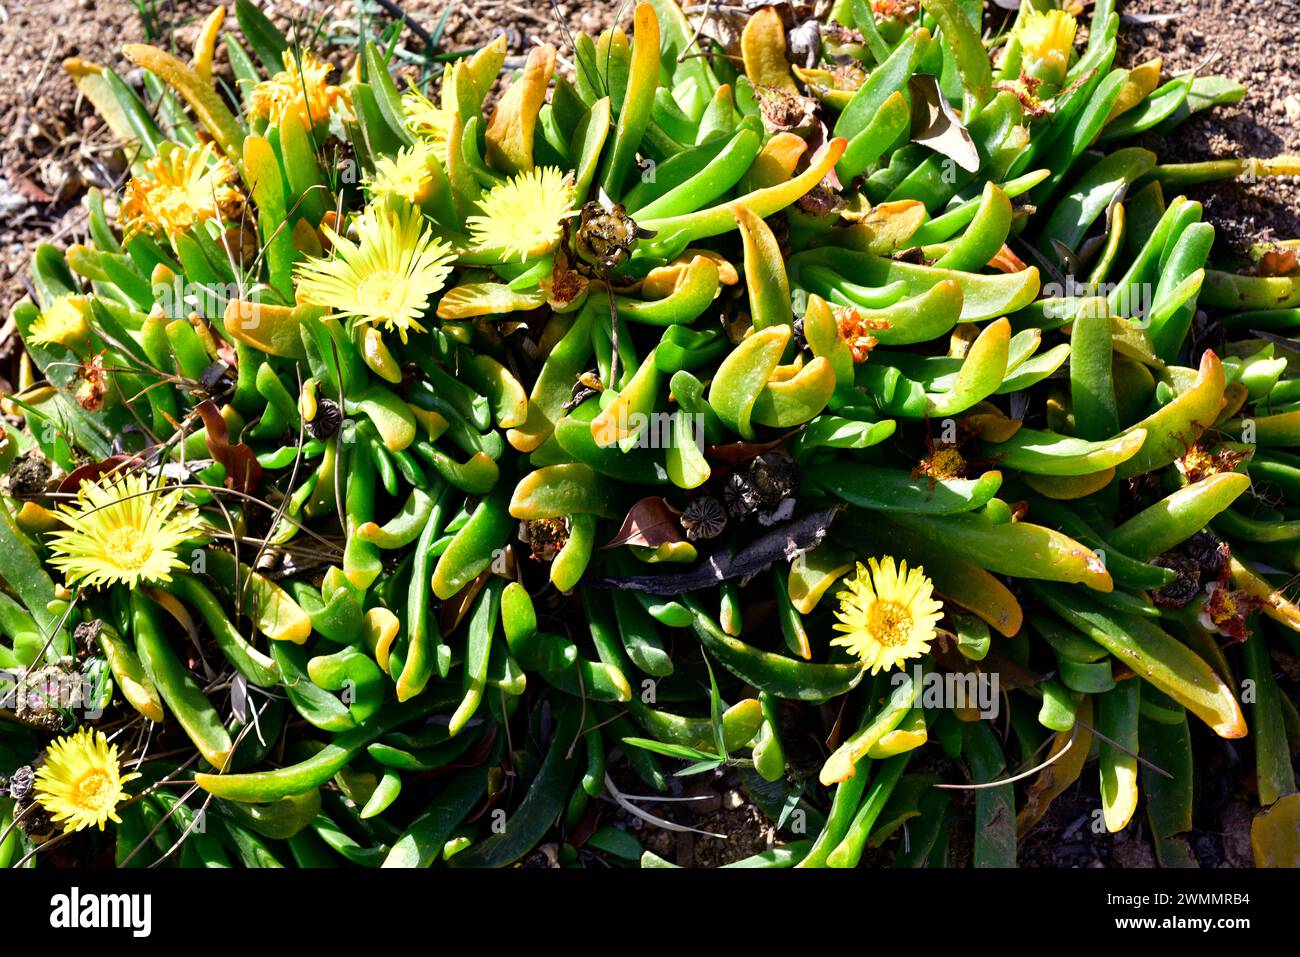 Glottiphyllum longum is a ground-creeping succulent plant native to South Africa. Stock Photo